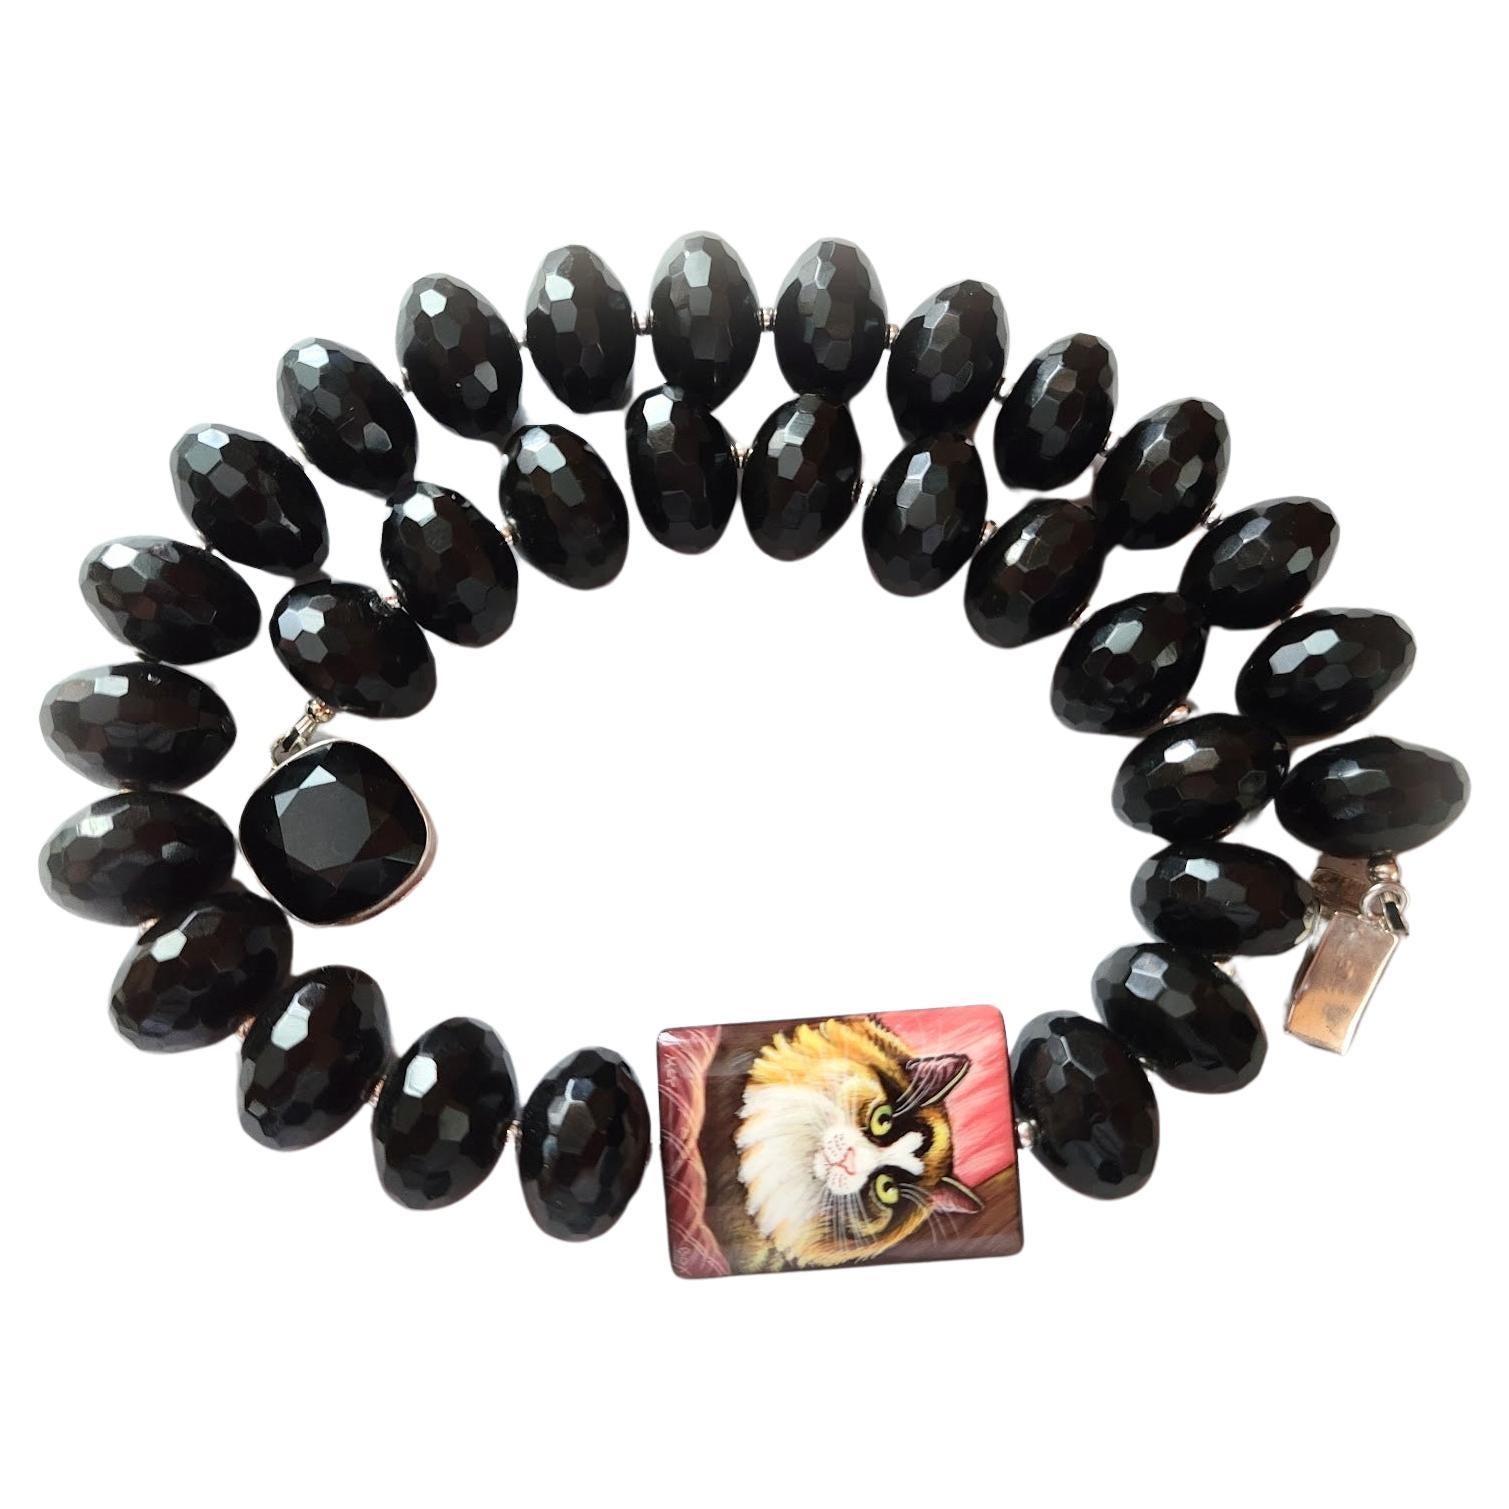 Black Onyx Necklace With Hand Painted Bead On Black Rectangular Agate